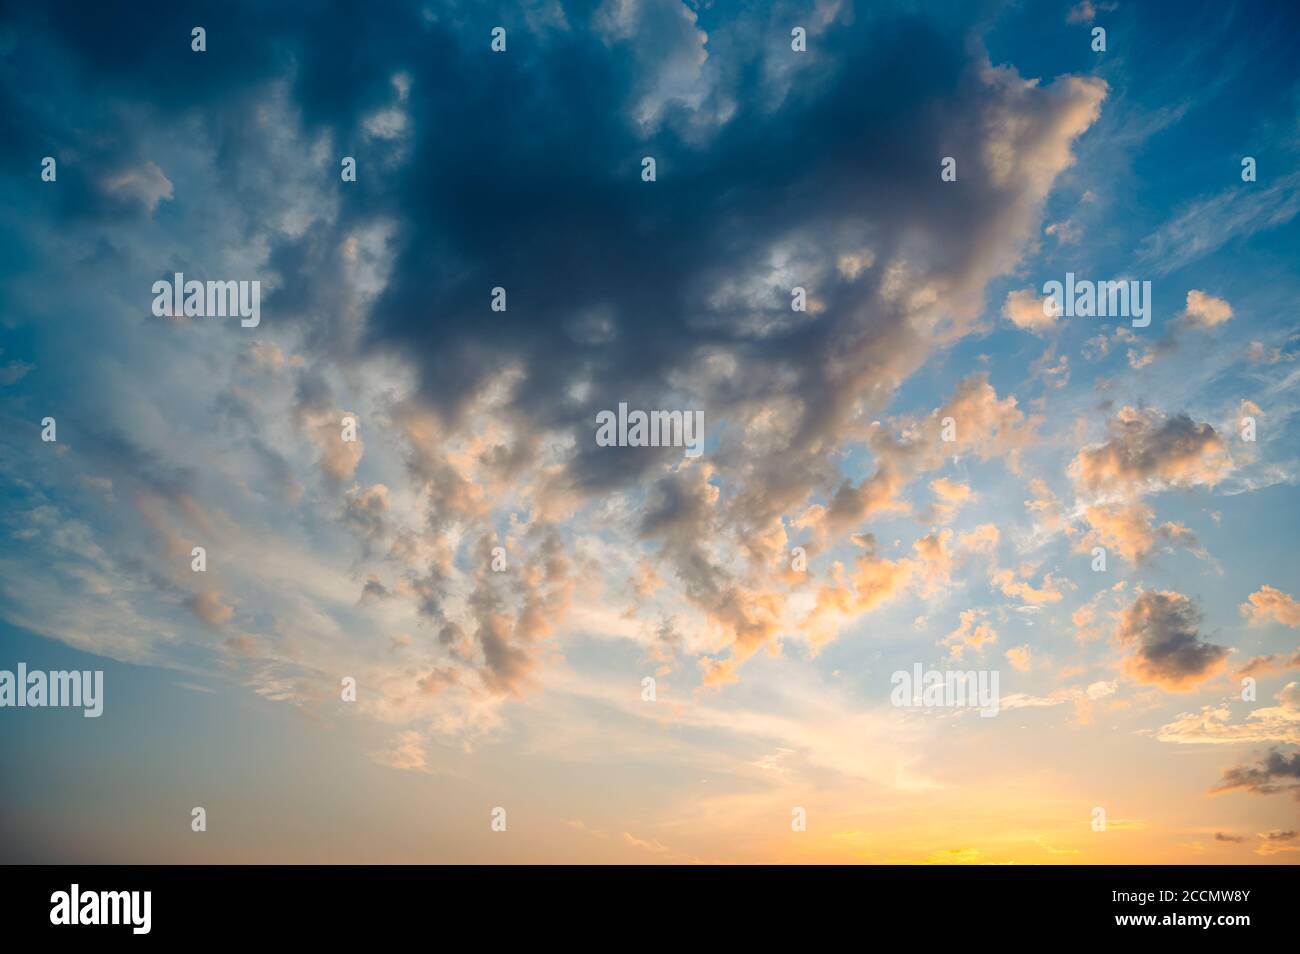 Beautiful summer sky full of clouds at sunset at golden hour. Interesting warm colors on the horizon. Stock Photo